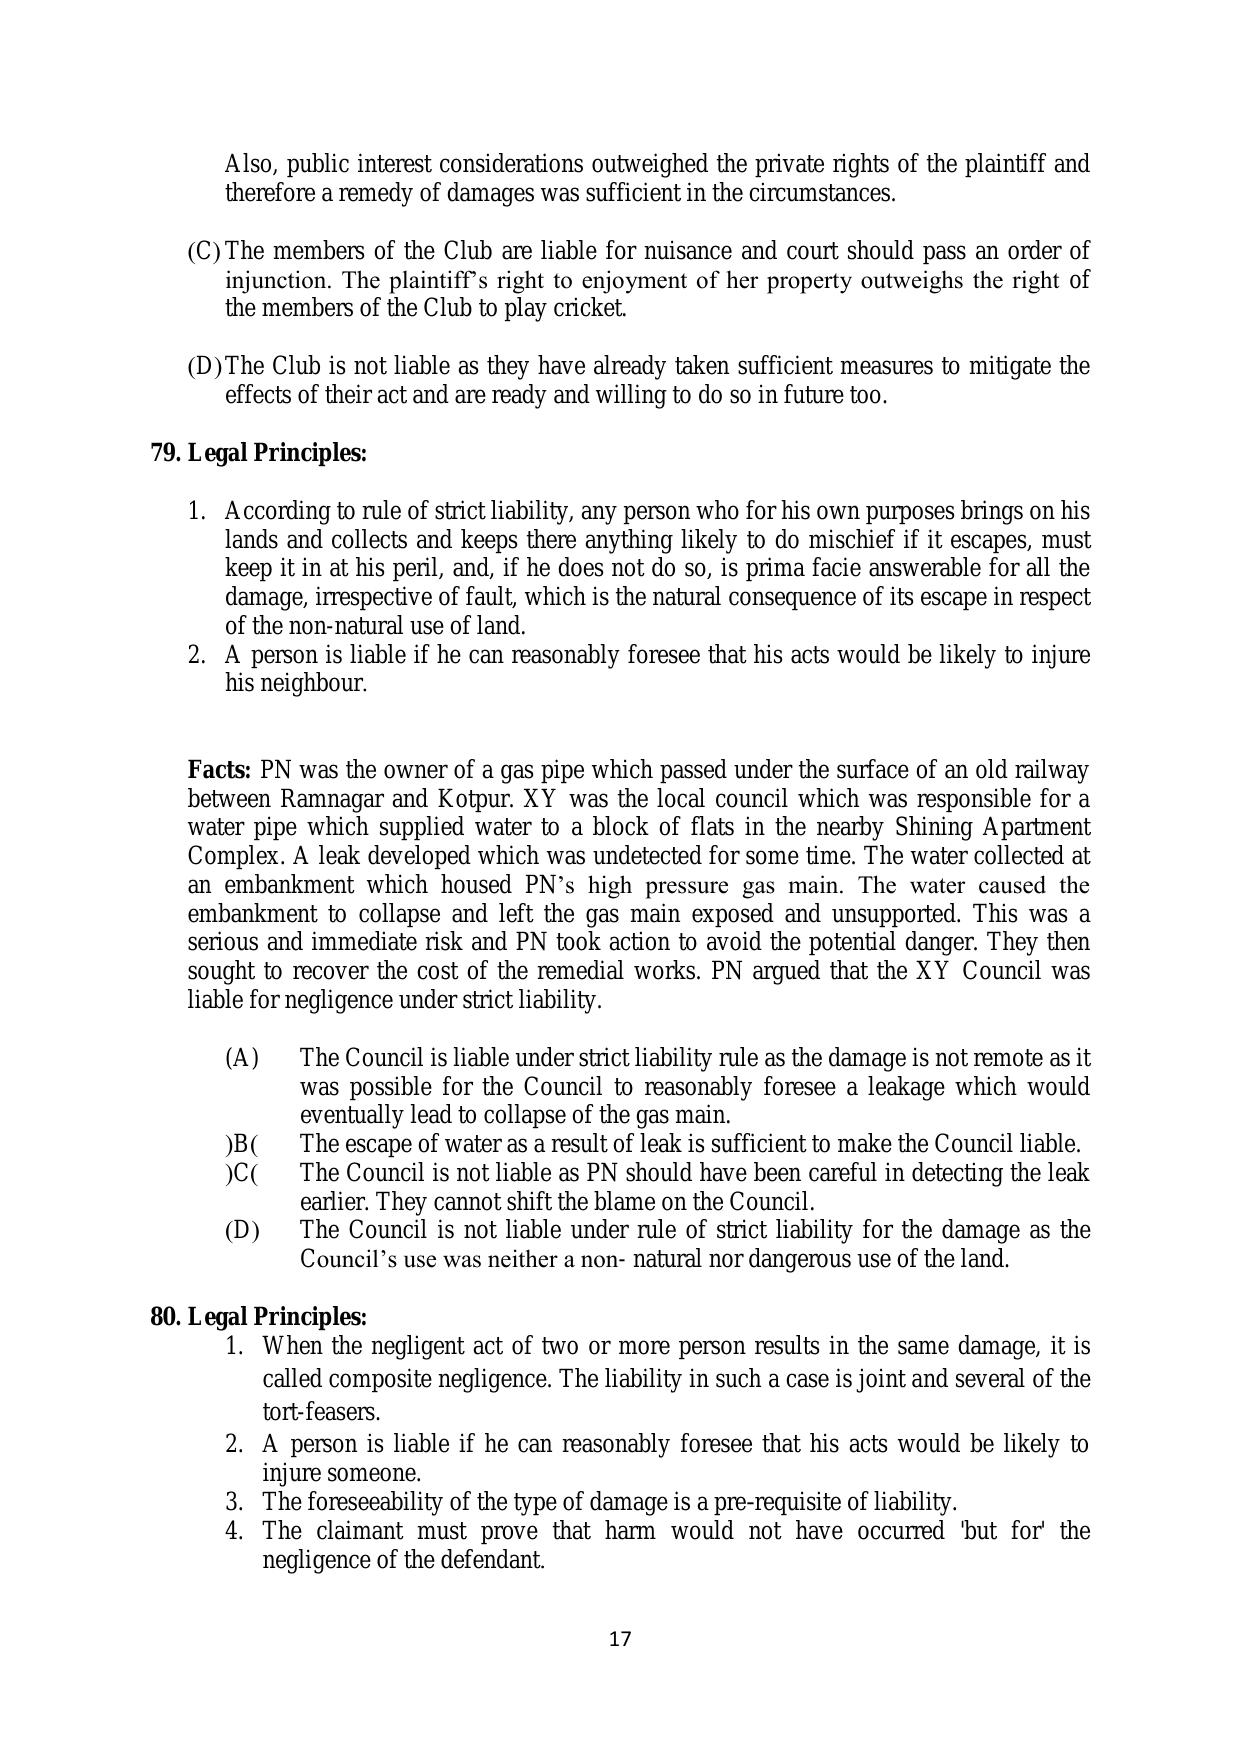 AILET 2020 Question Paper for BA LLB - Page 17